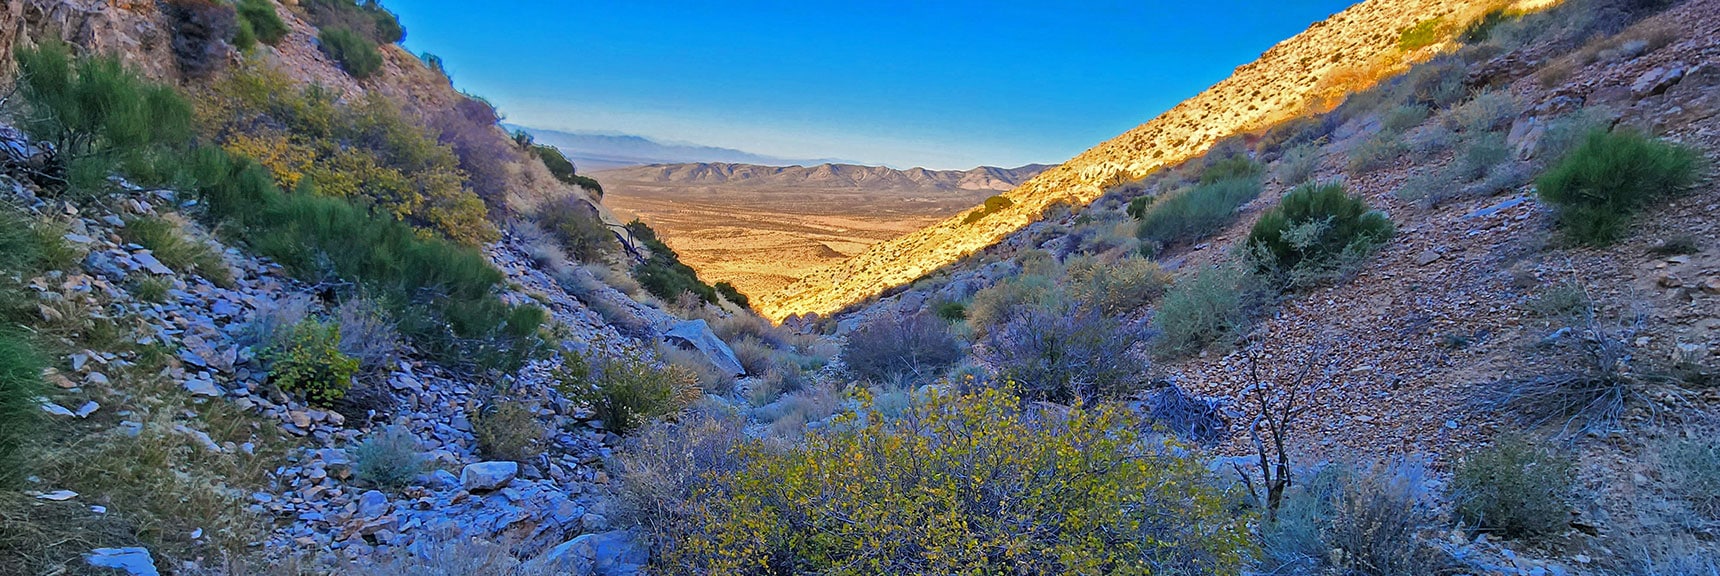 Continuing to Ascend. Another View Down Chute to Lower Opening | Landmark Bluff Summit | Lovell Canyon, Nevada